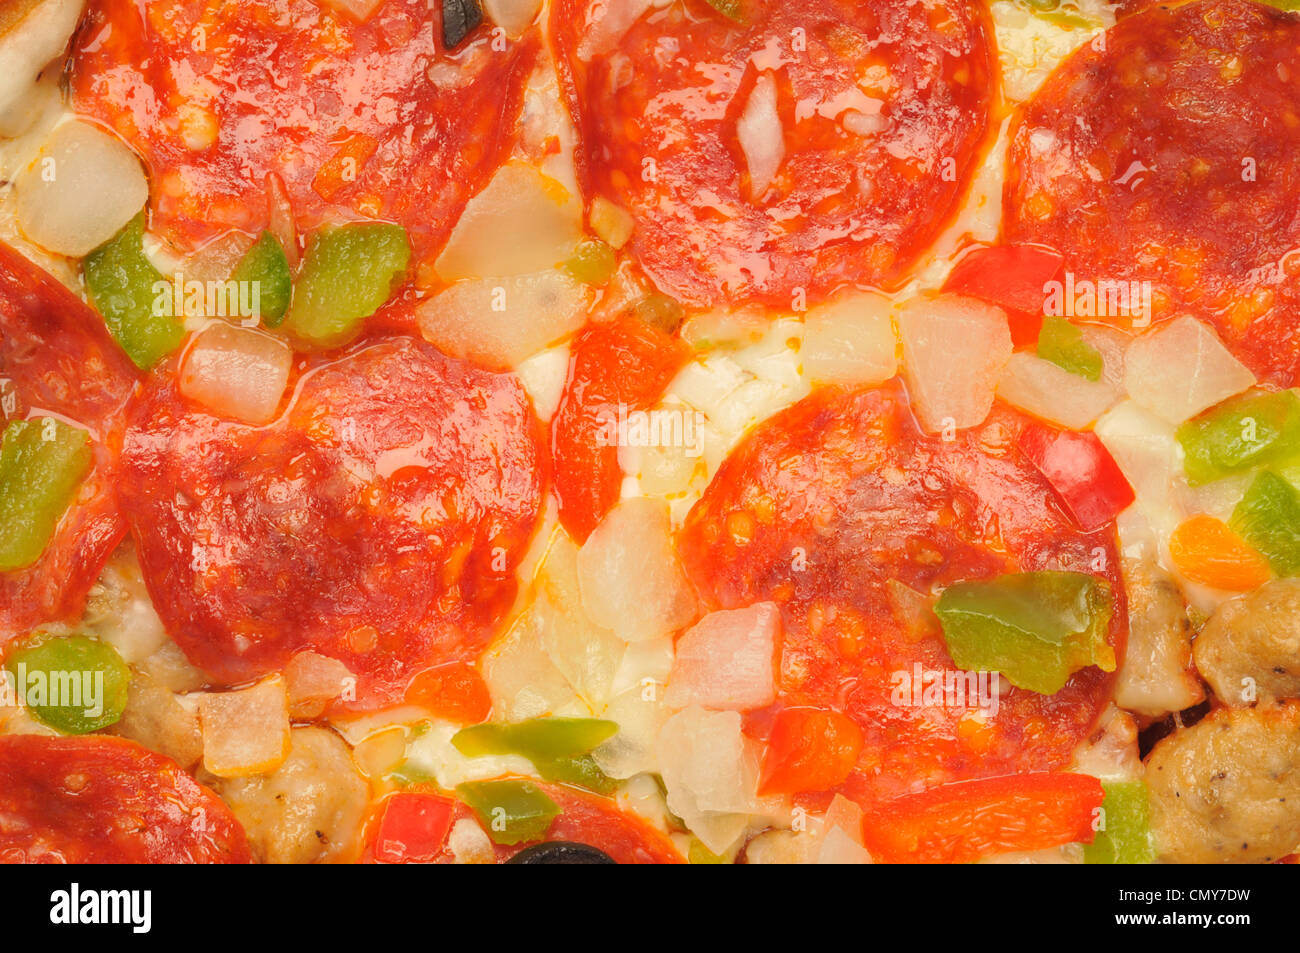 Macro close-up detail of pizza with cheese, pepperoni, sausage, red and green peppers, onions Stock Photo